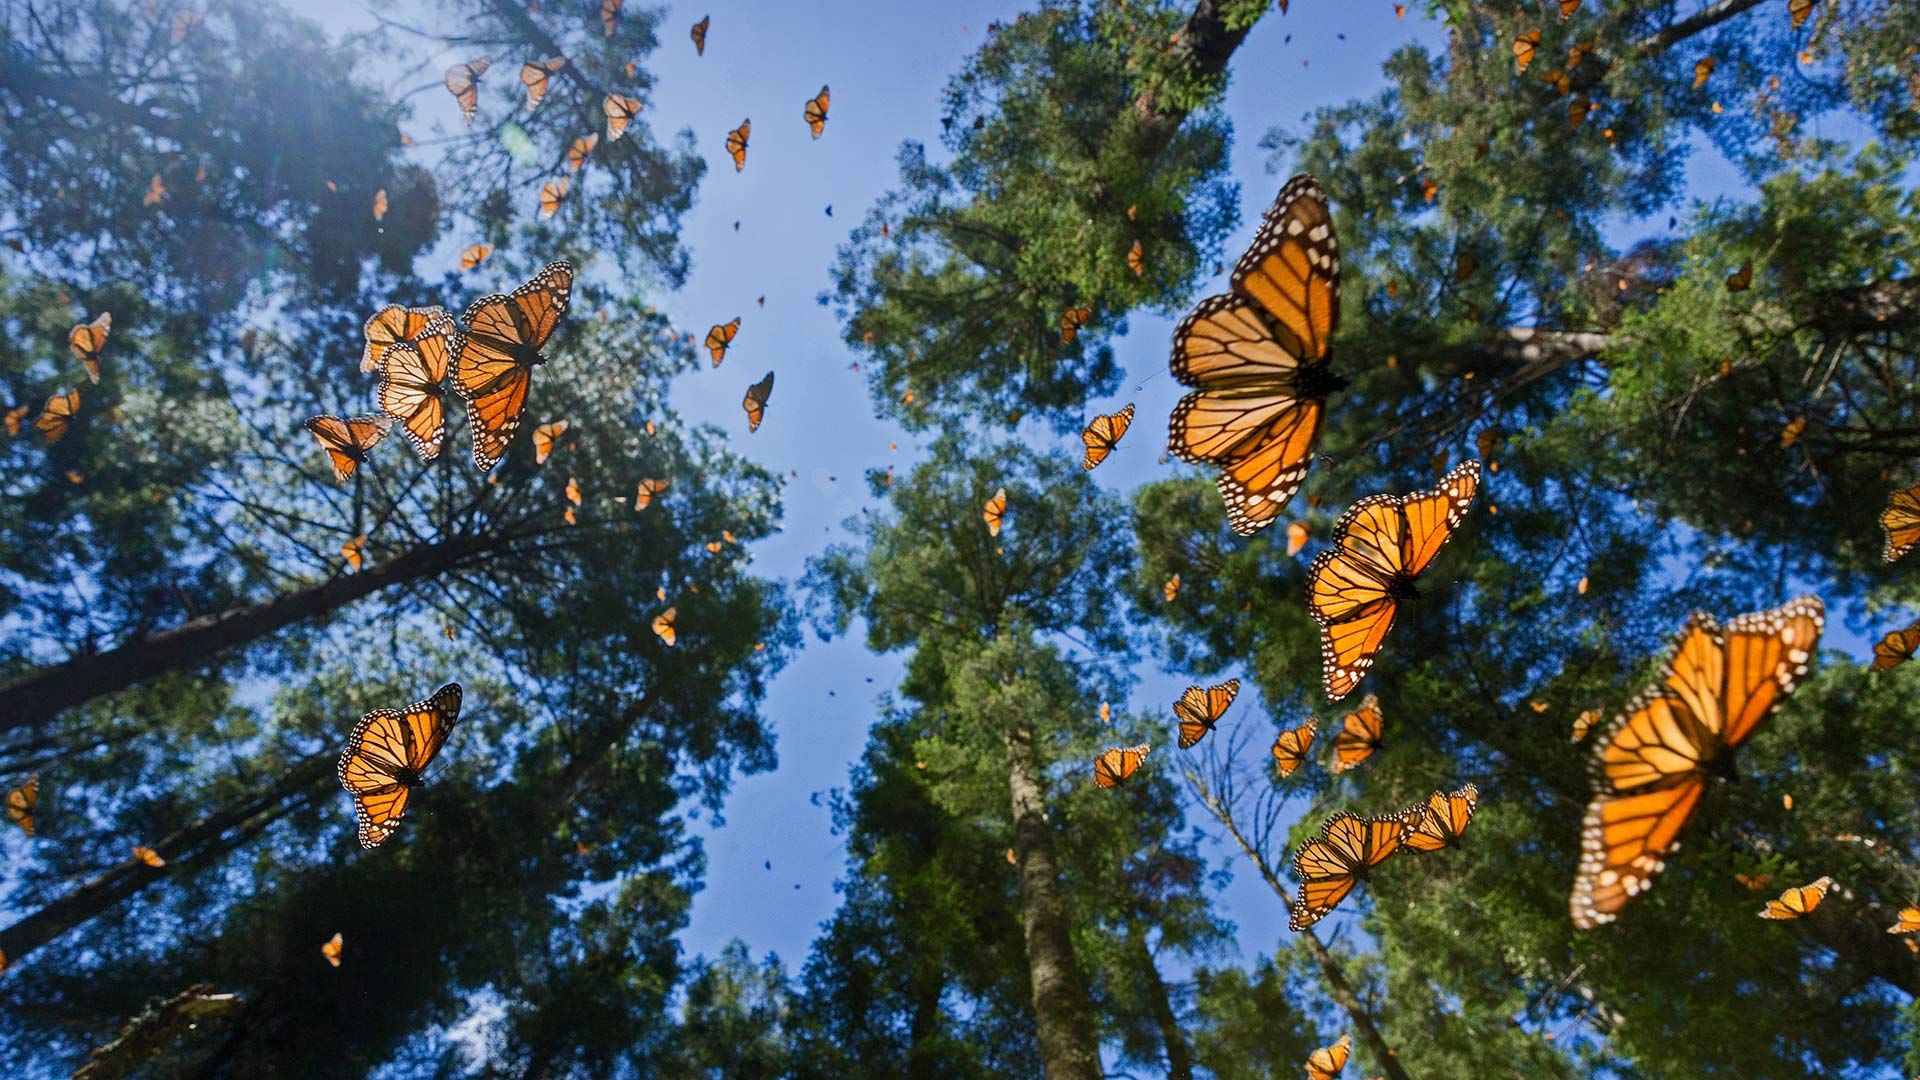 Monarch butterflies in the Monarch Butterfly Biosphere Reserve, Angangueo, Mexico - Sylvain Cordier